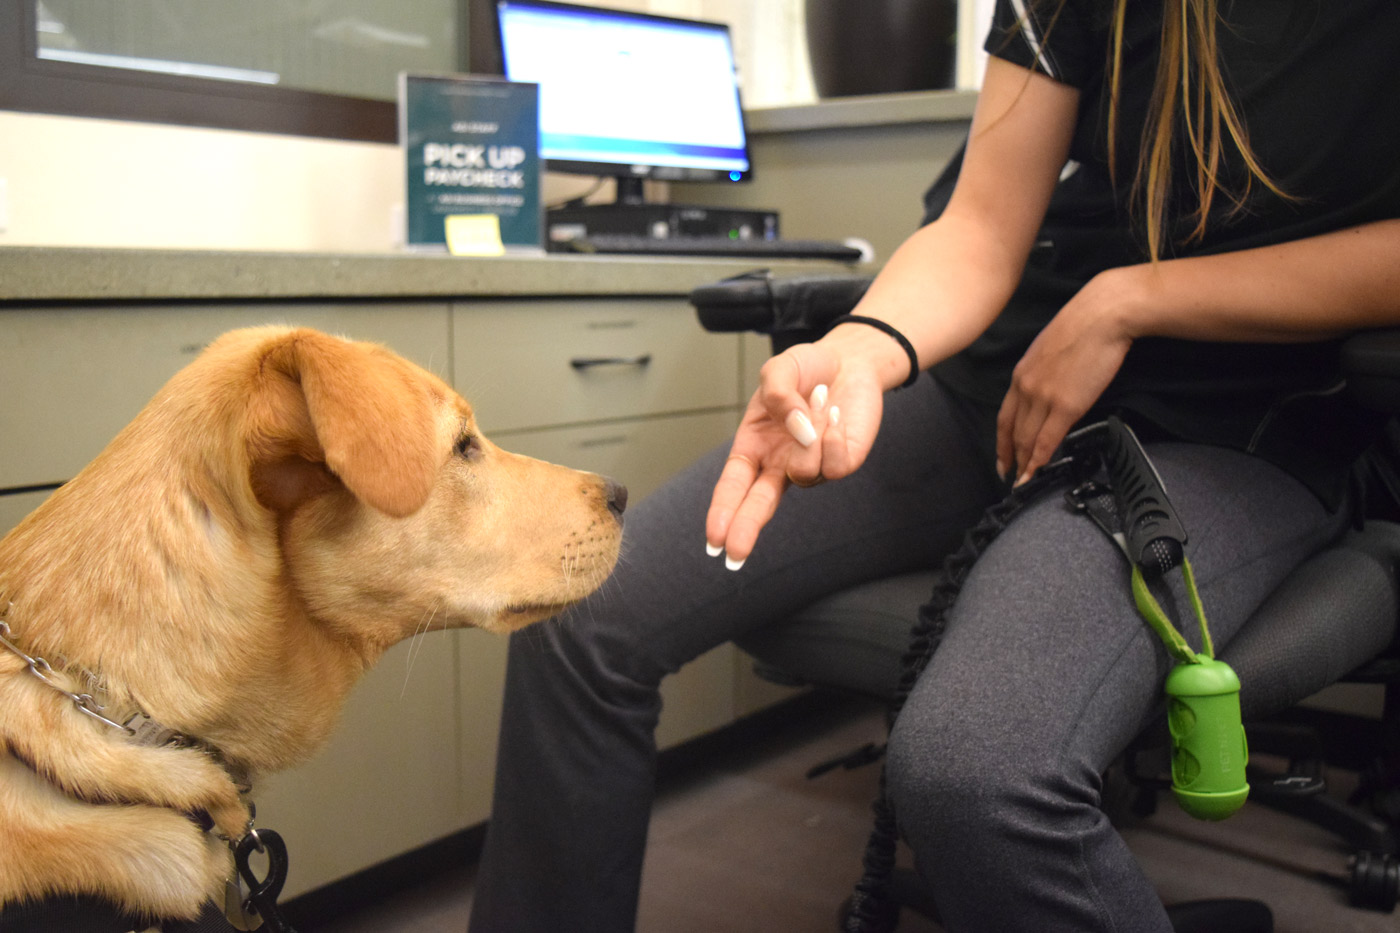 “I’m doing an owner-trained service dog and that really just means you’re going to train your dog to become your service animal yourself,” Chock said. One of the skills she works on is using the word “touch” to train Mo to alert her when she is in a crisis.Photo Credit: Sydney Brandt